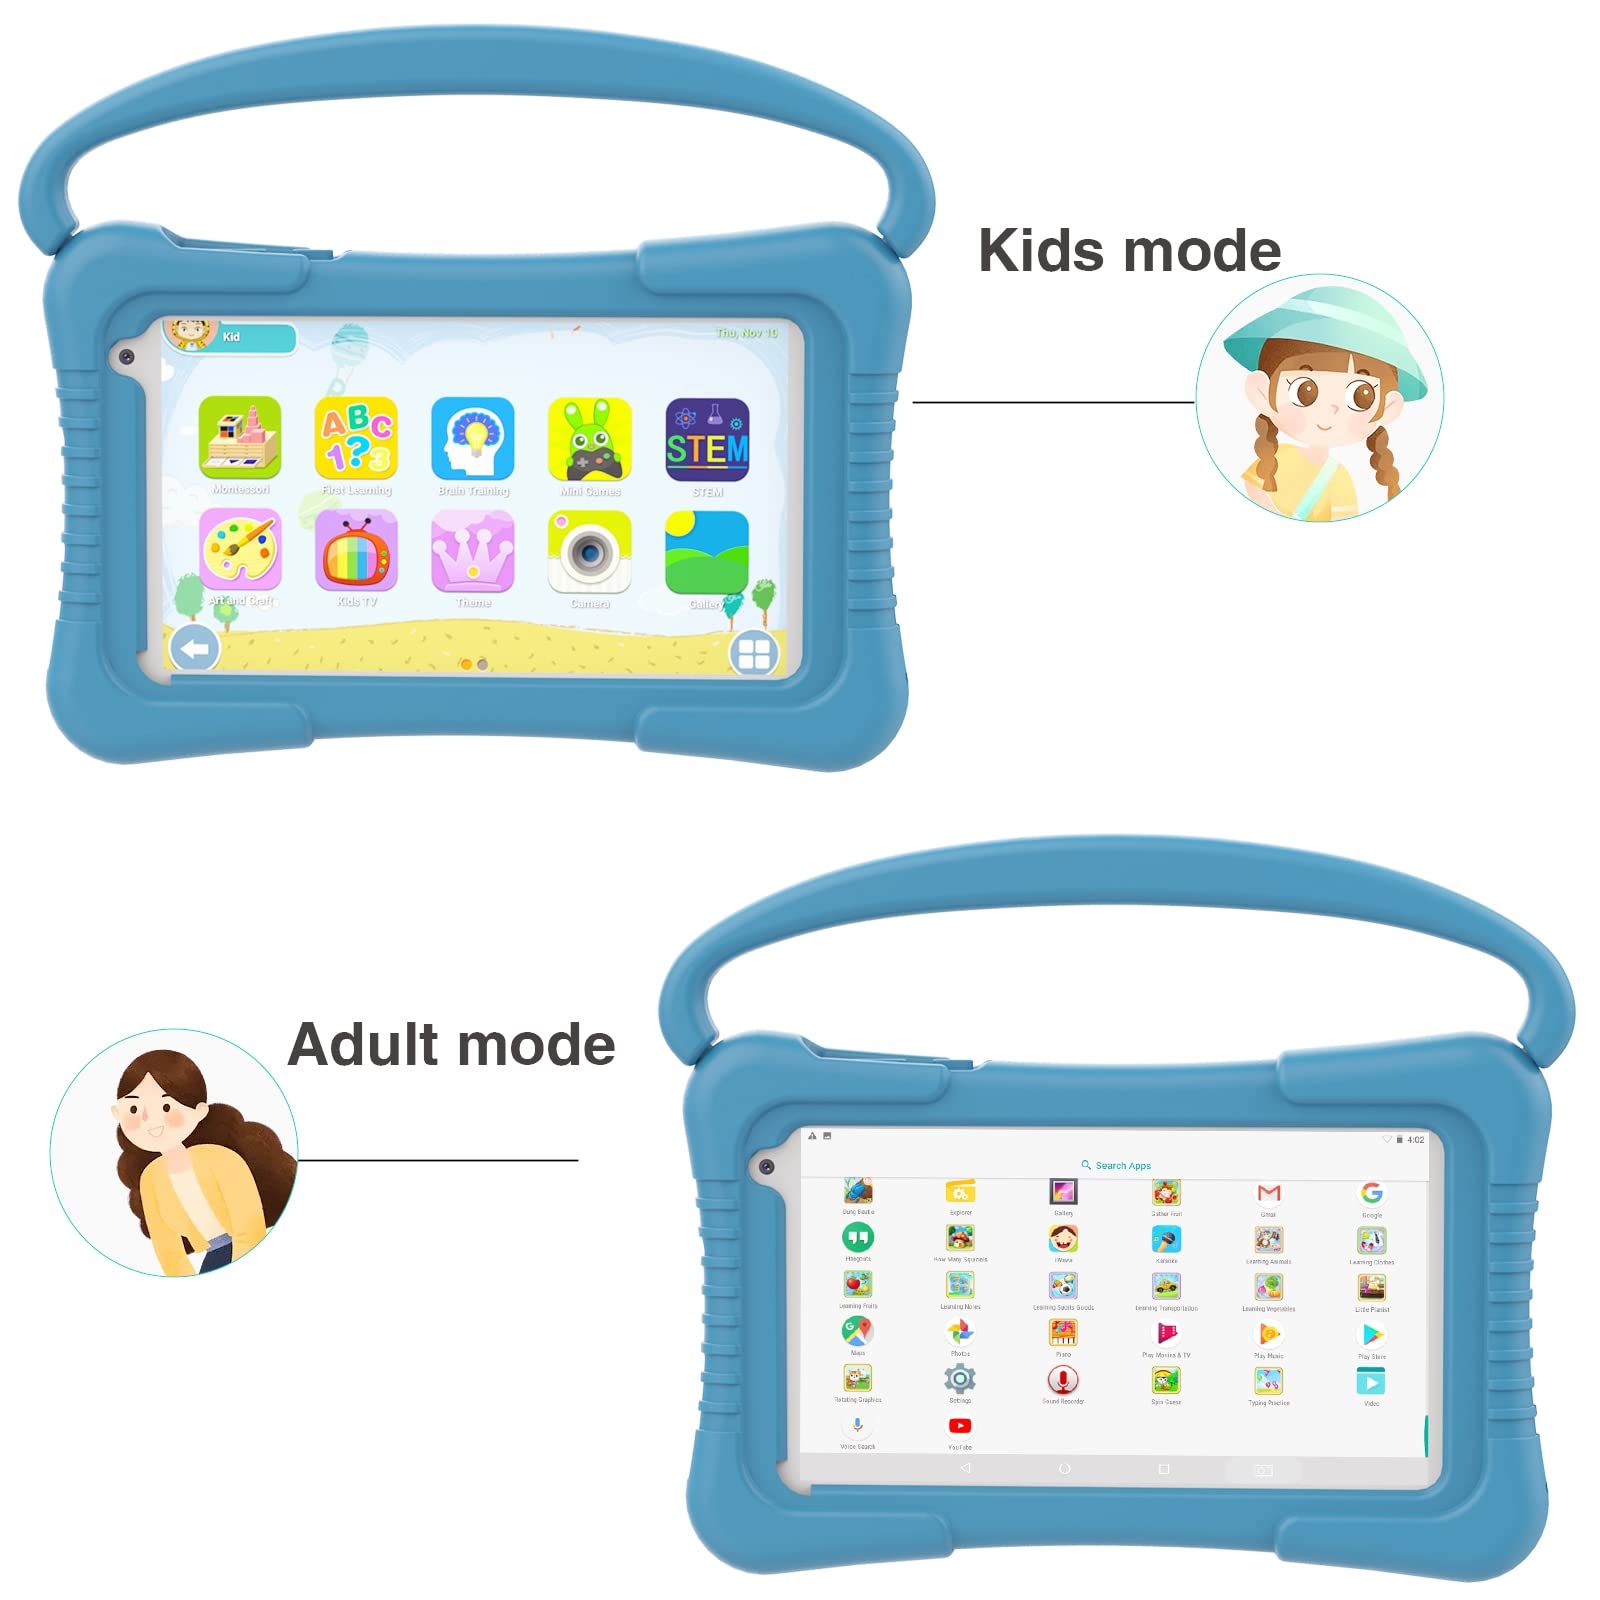 IWGGO Kids 7-inch Tablet with 32GB Storage, Dual Camera, Android 11, Parental Controls, Toddler-friendly